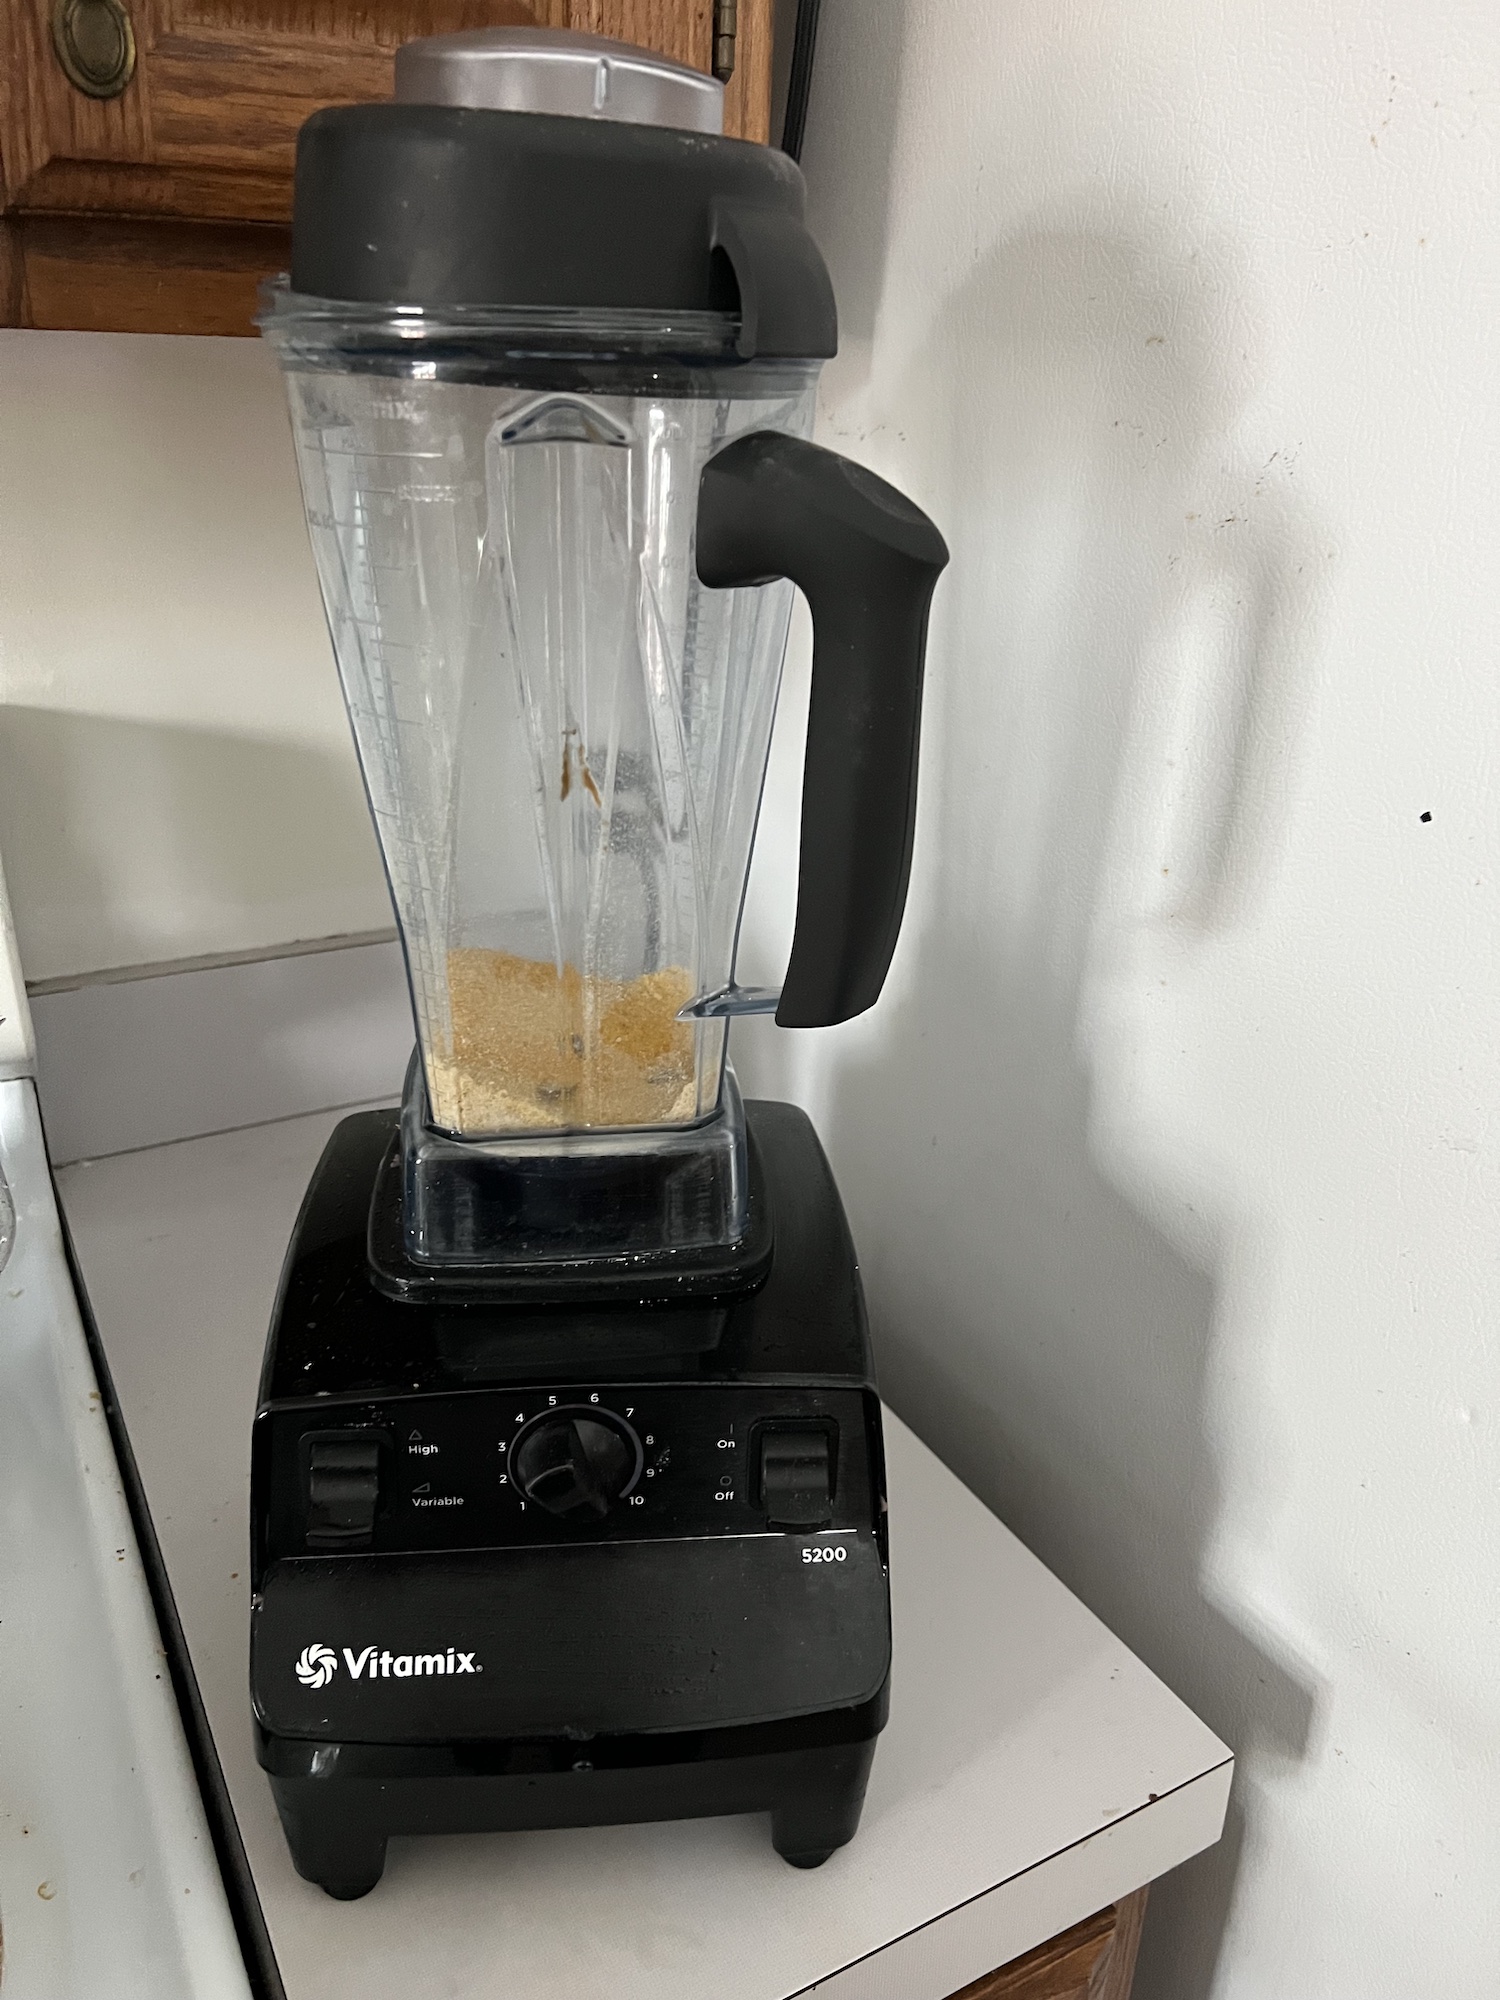 Vitamix One Review: Does Vitamix's Least Expensive Blender Hold Up to the  High-Price Models?